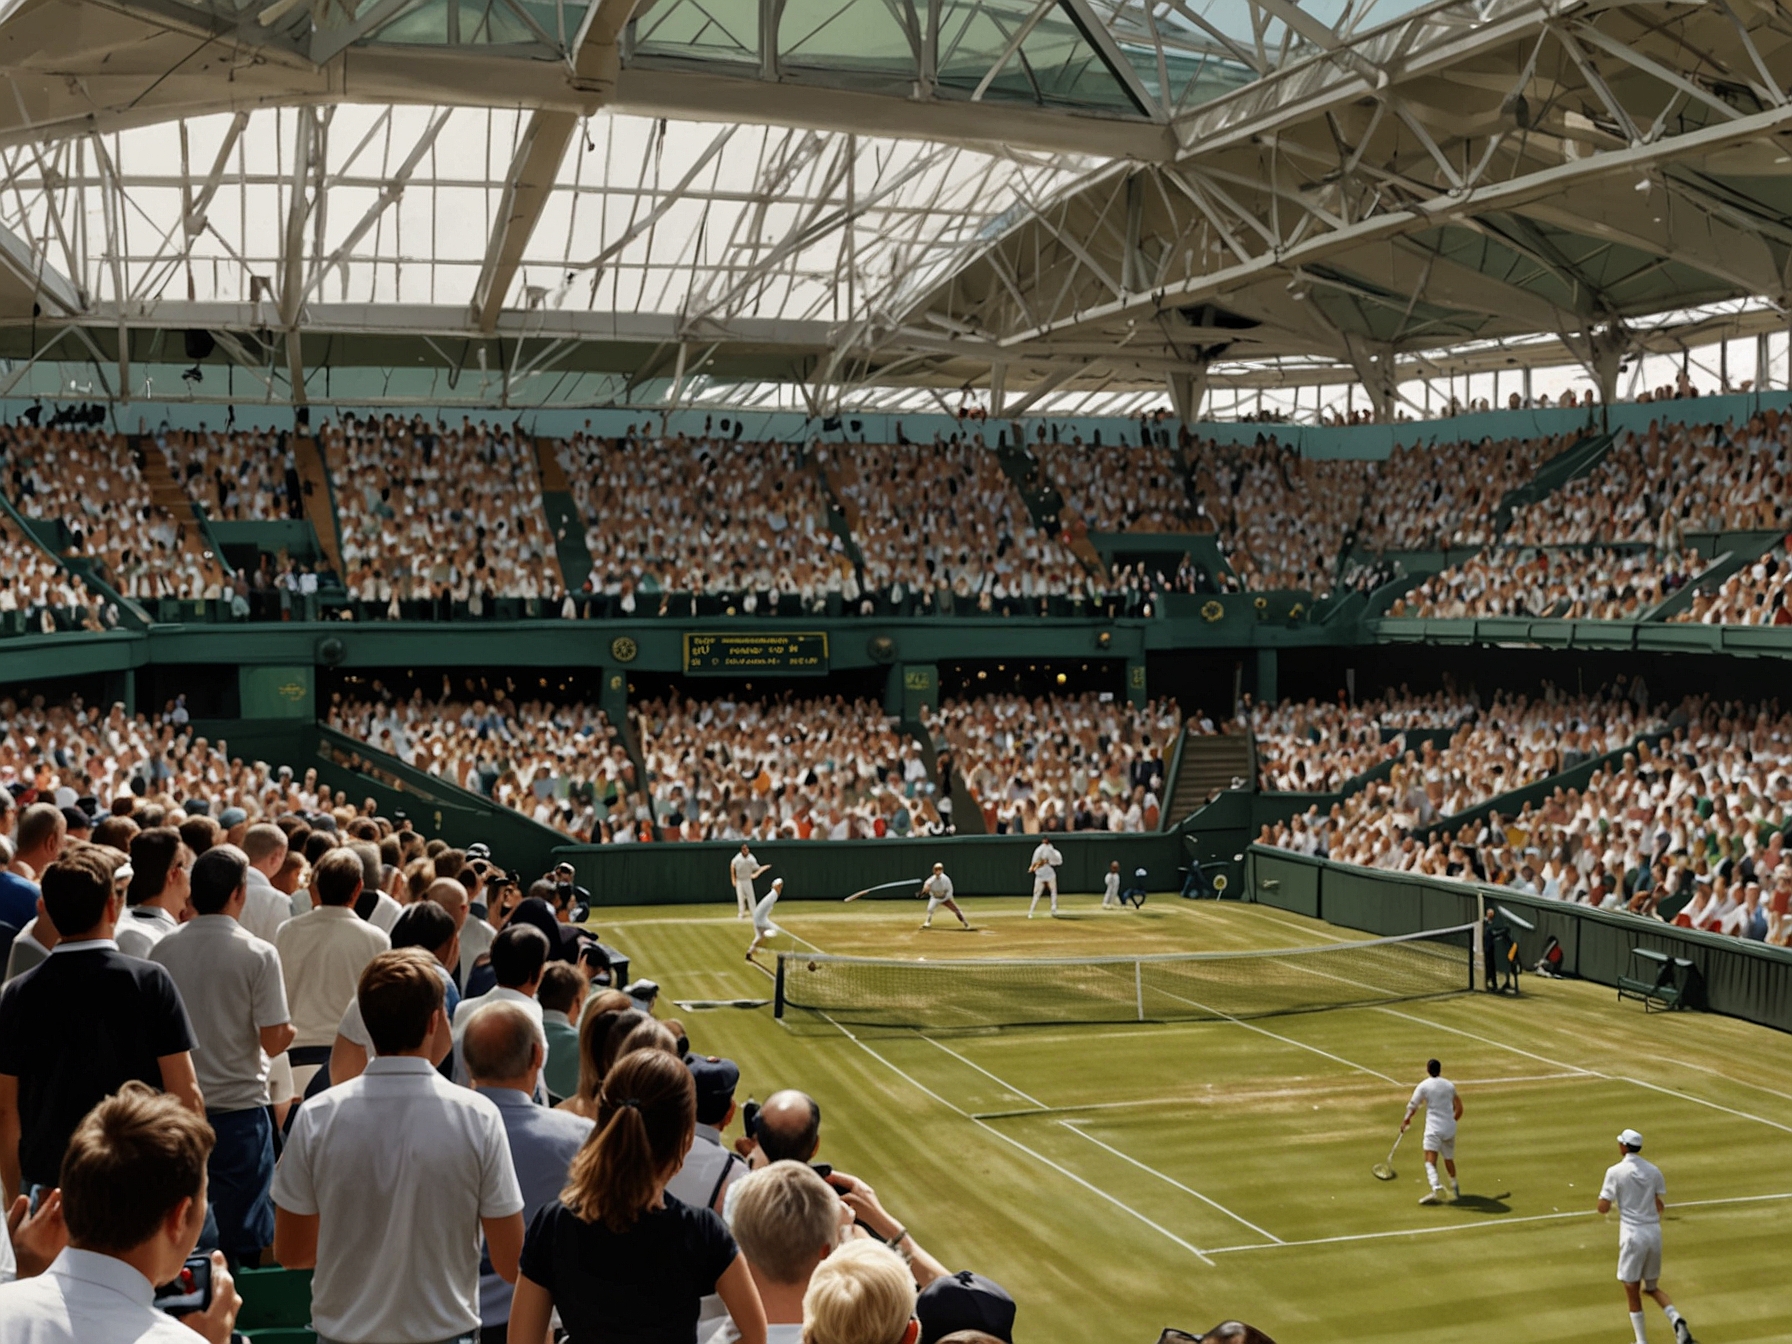 A packed Wimbledon Centre Court with players competing in the men's singles final, showcasing the high-stakes atmosphere and the lucrative £2.35 million prize for the champion.